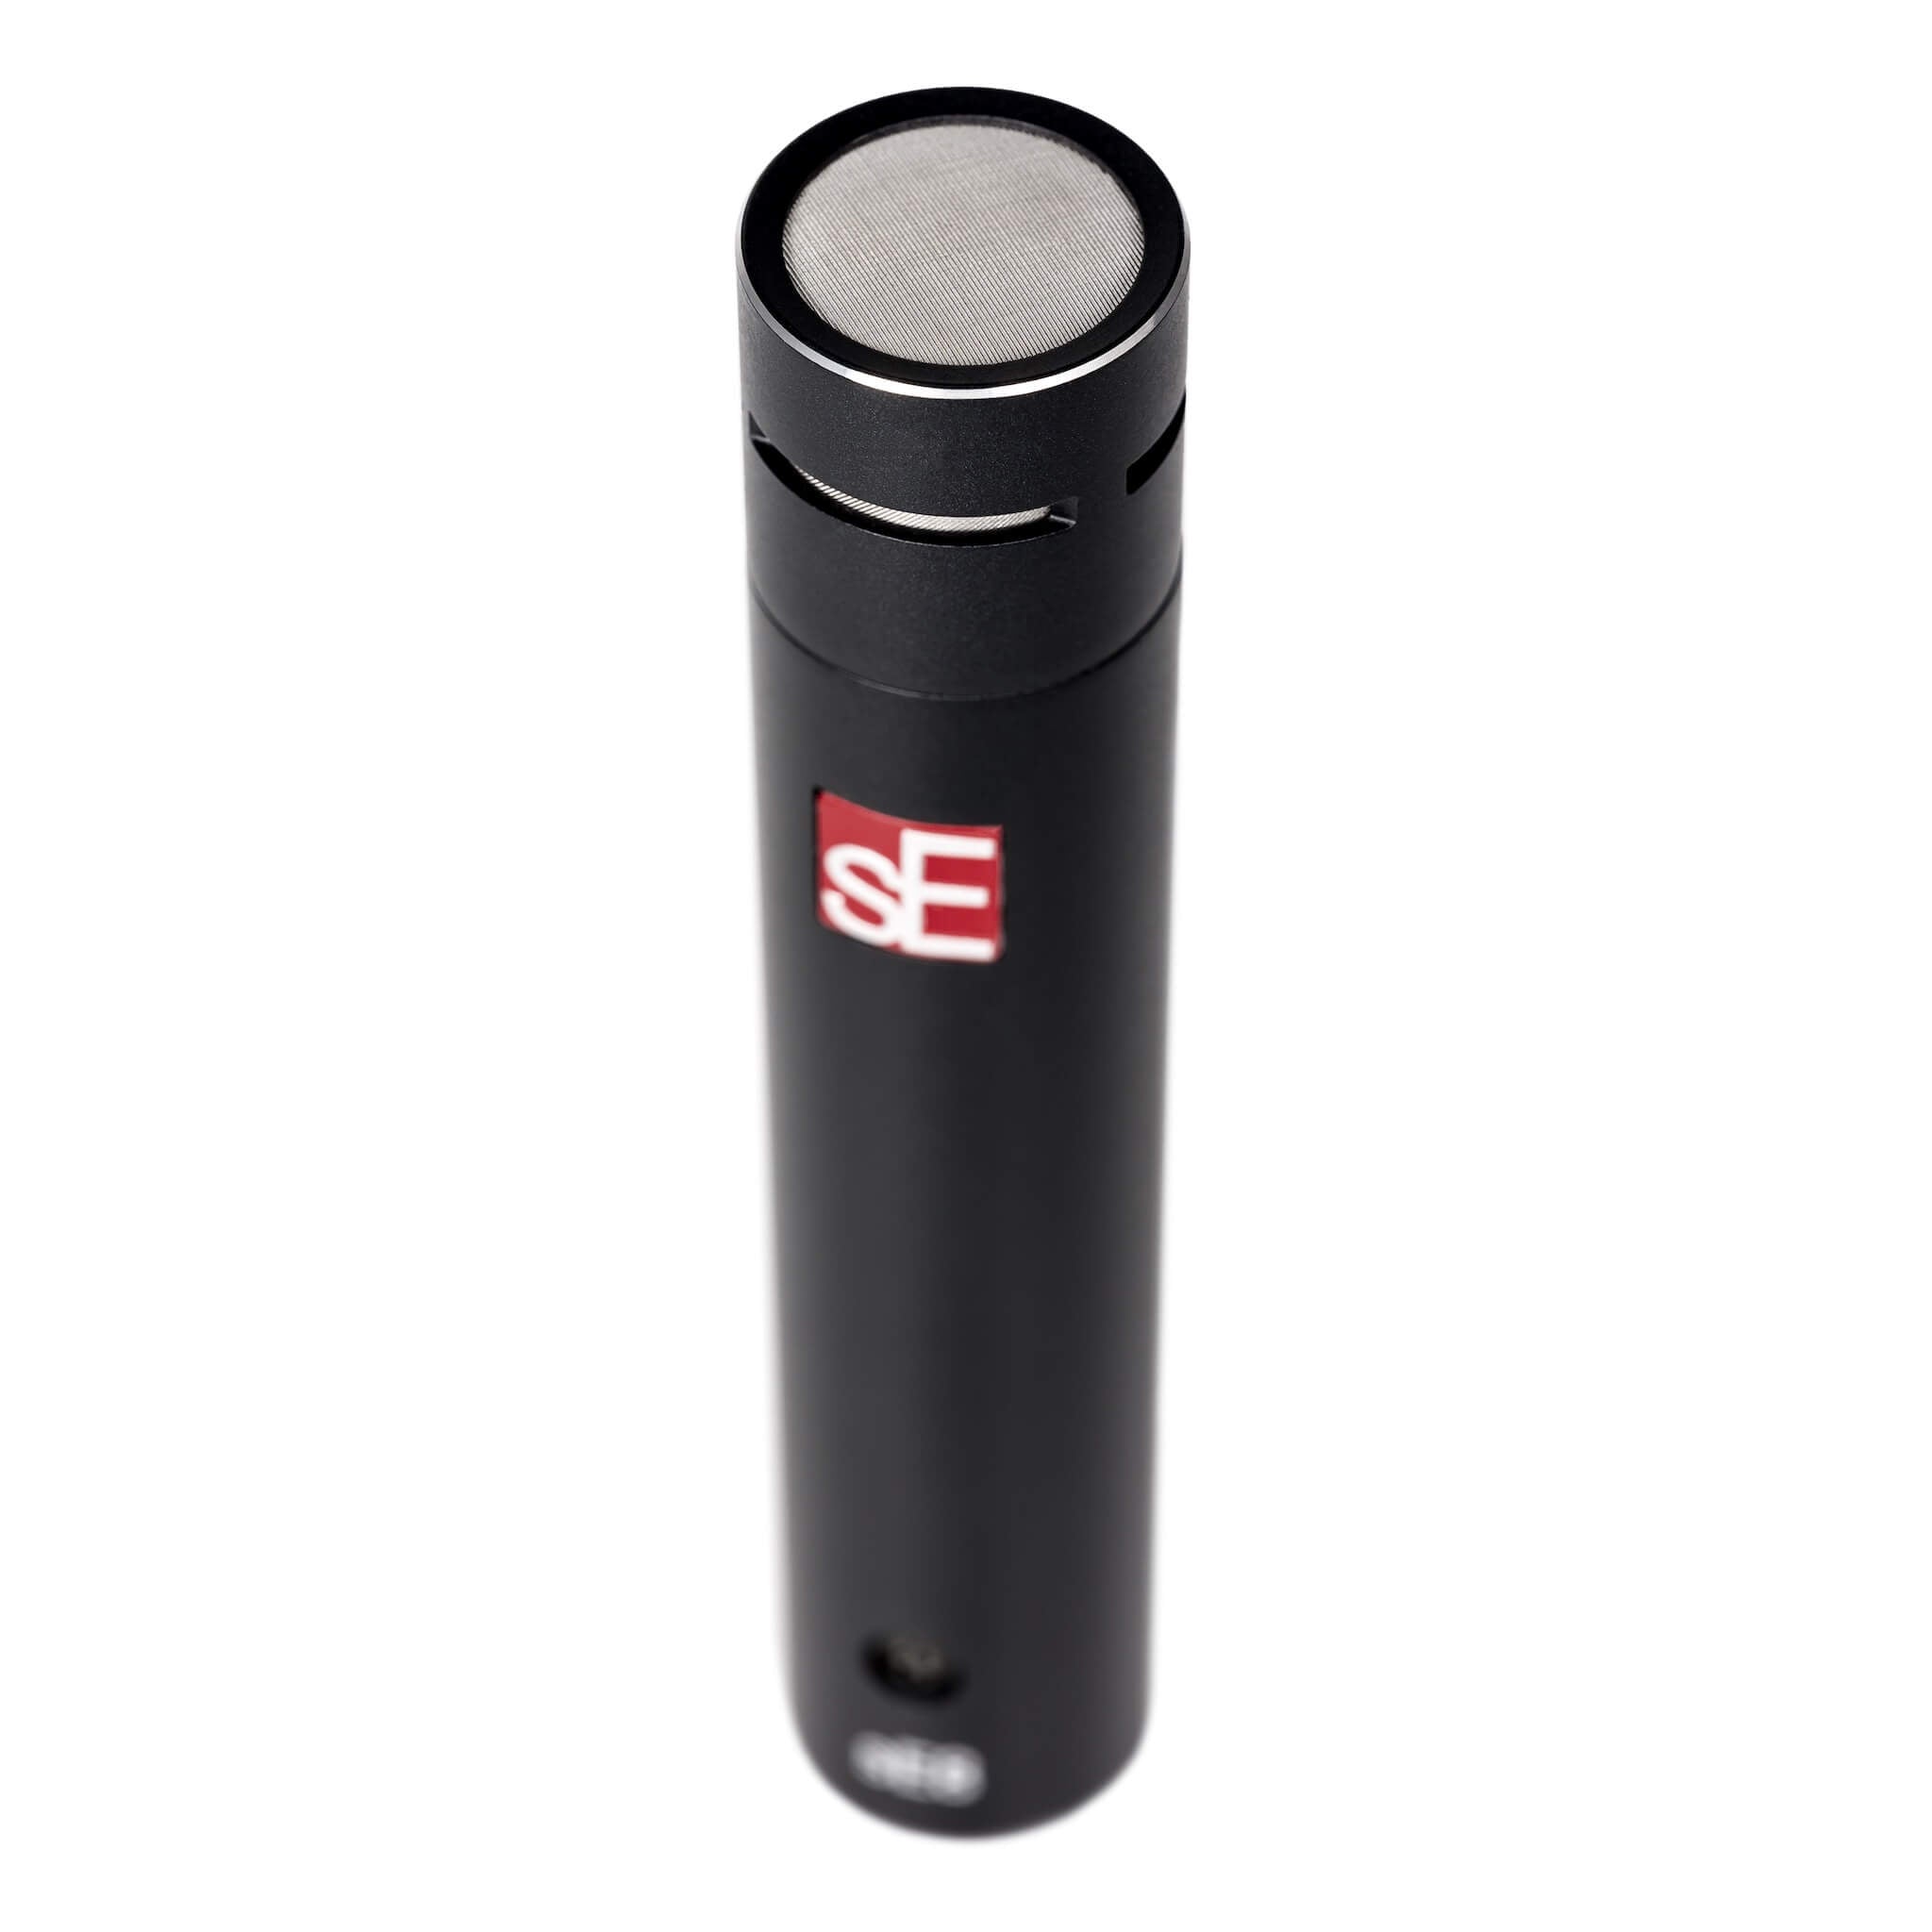 sE Electronics sE8 - Small Diaphragm Cardioid Condenser Microphone, top